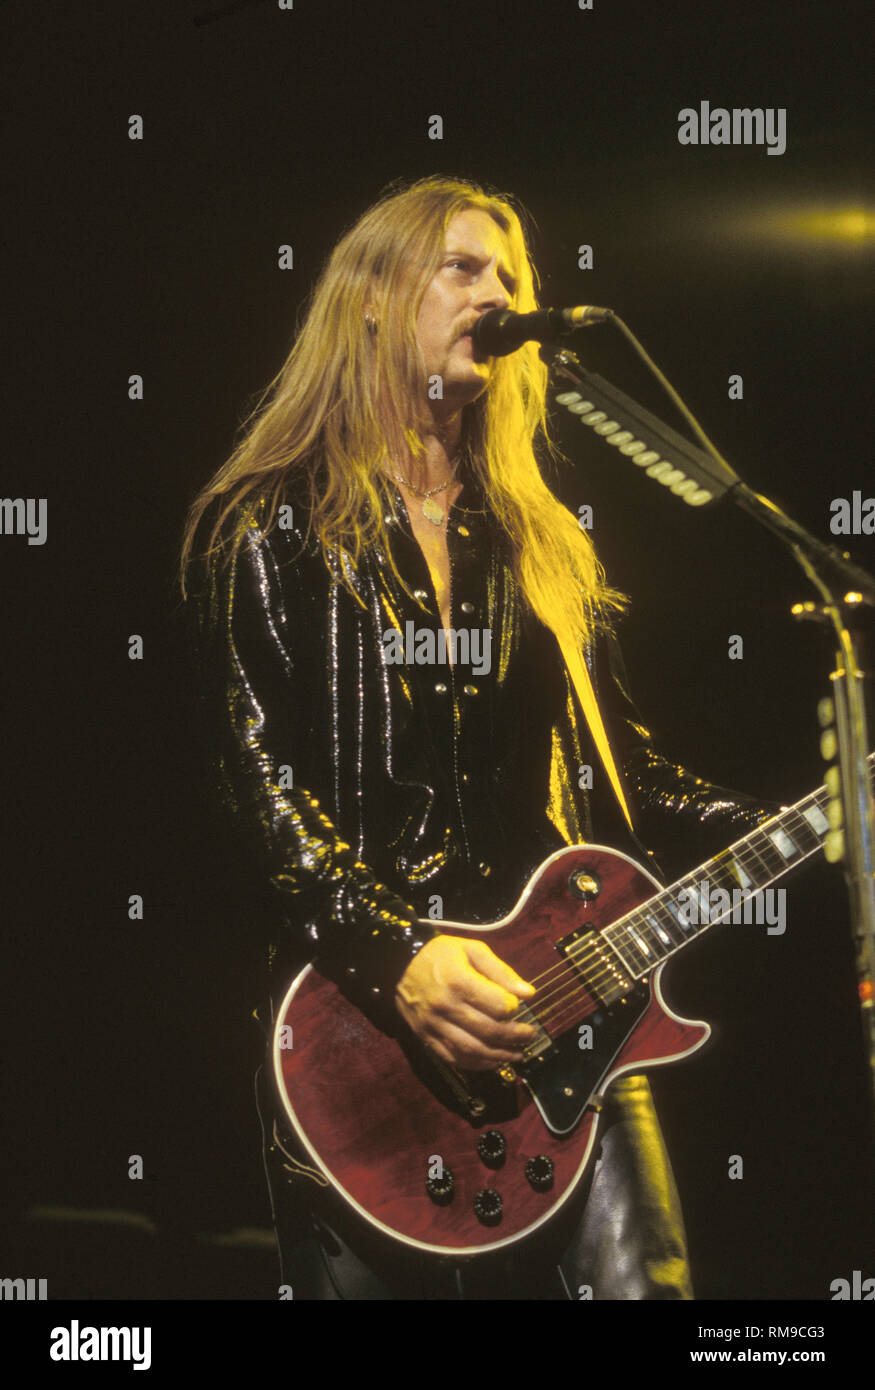 Guitarist, singer, and songwriter Jerry Cantrell, best known for his work with the grunge band Alice in Chains, is shown performing 'live' in concert. Stock Photo